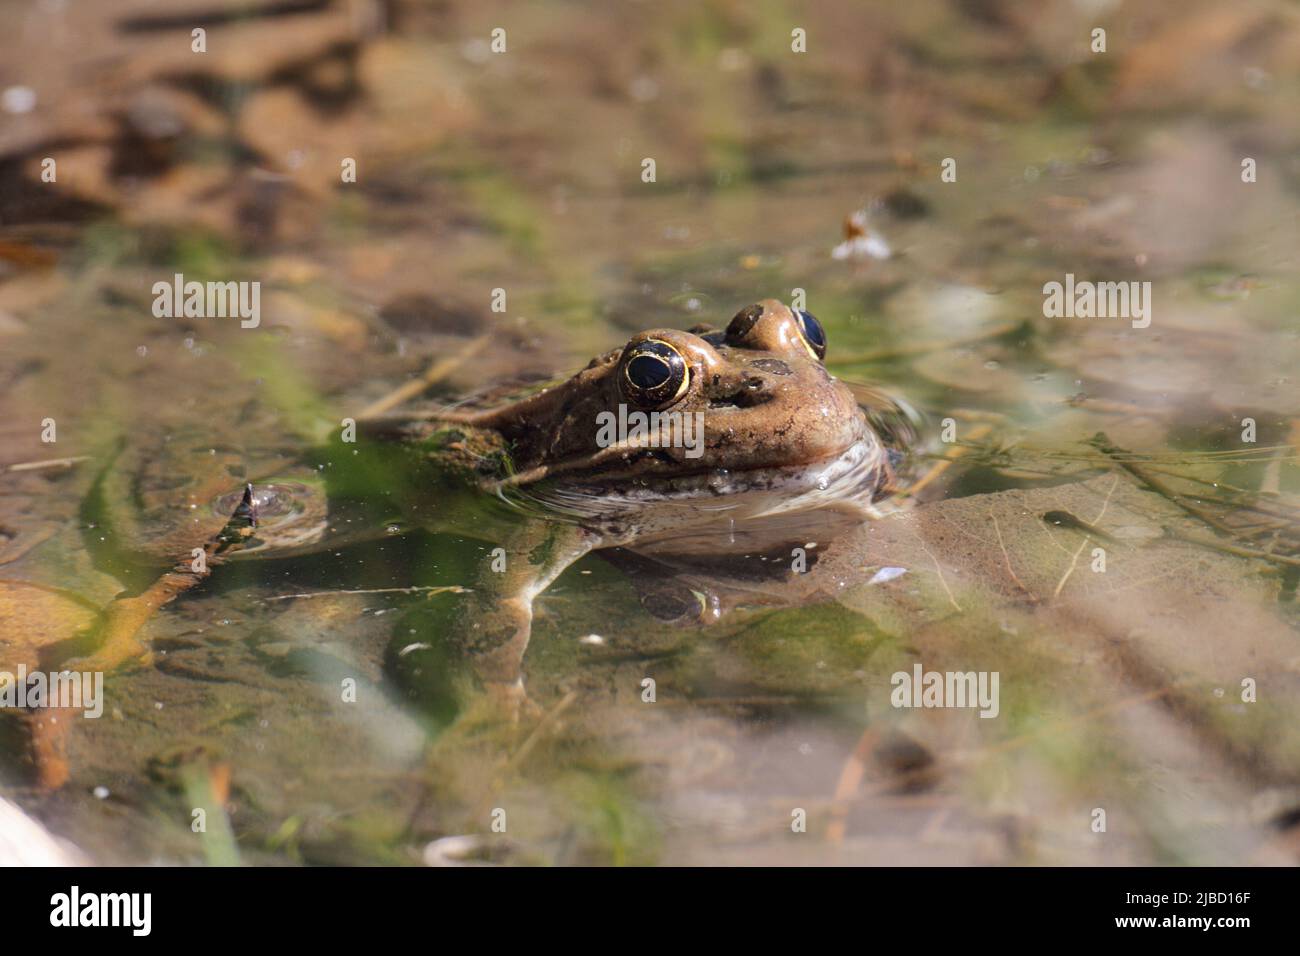 wild frog in pond water alone Stock Photo